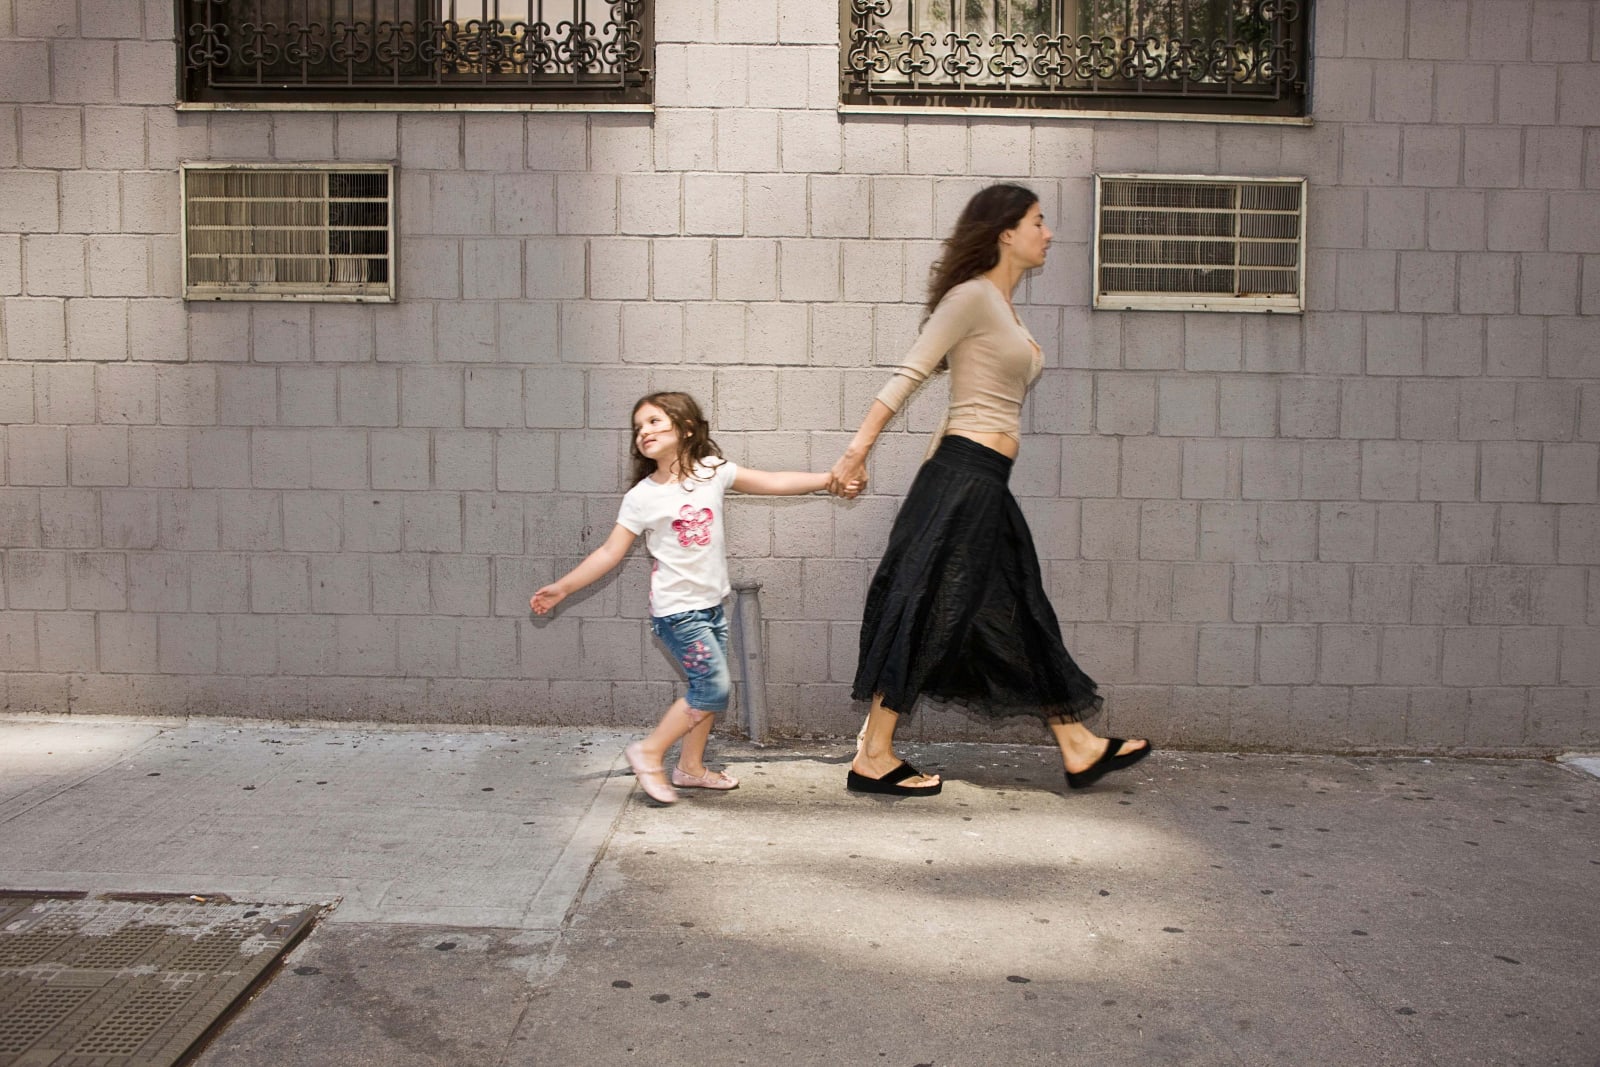 Elinor Carucci photograph of the artist walking on the sidewalk holding her daughter's hand